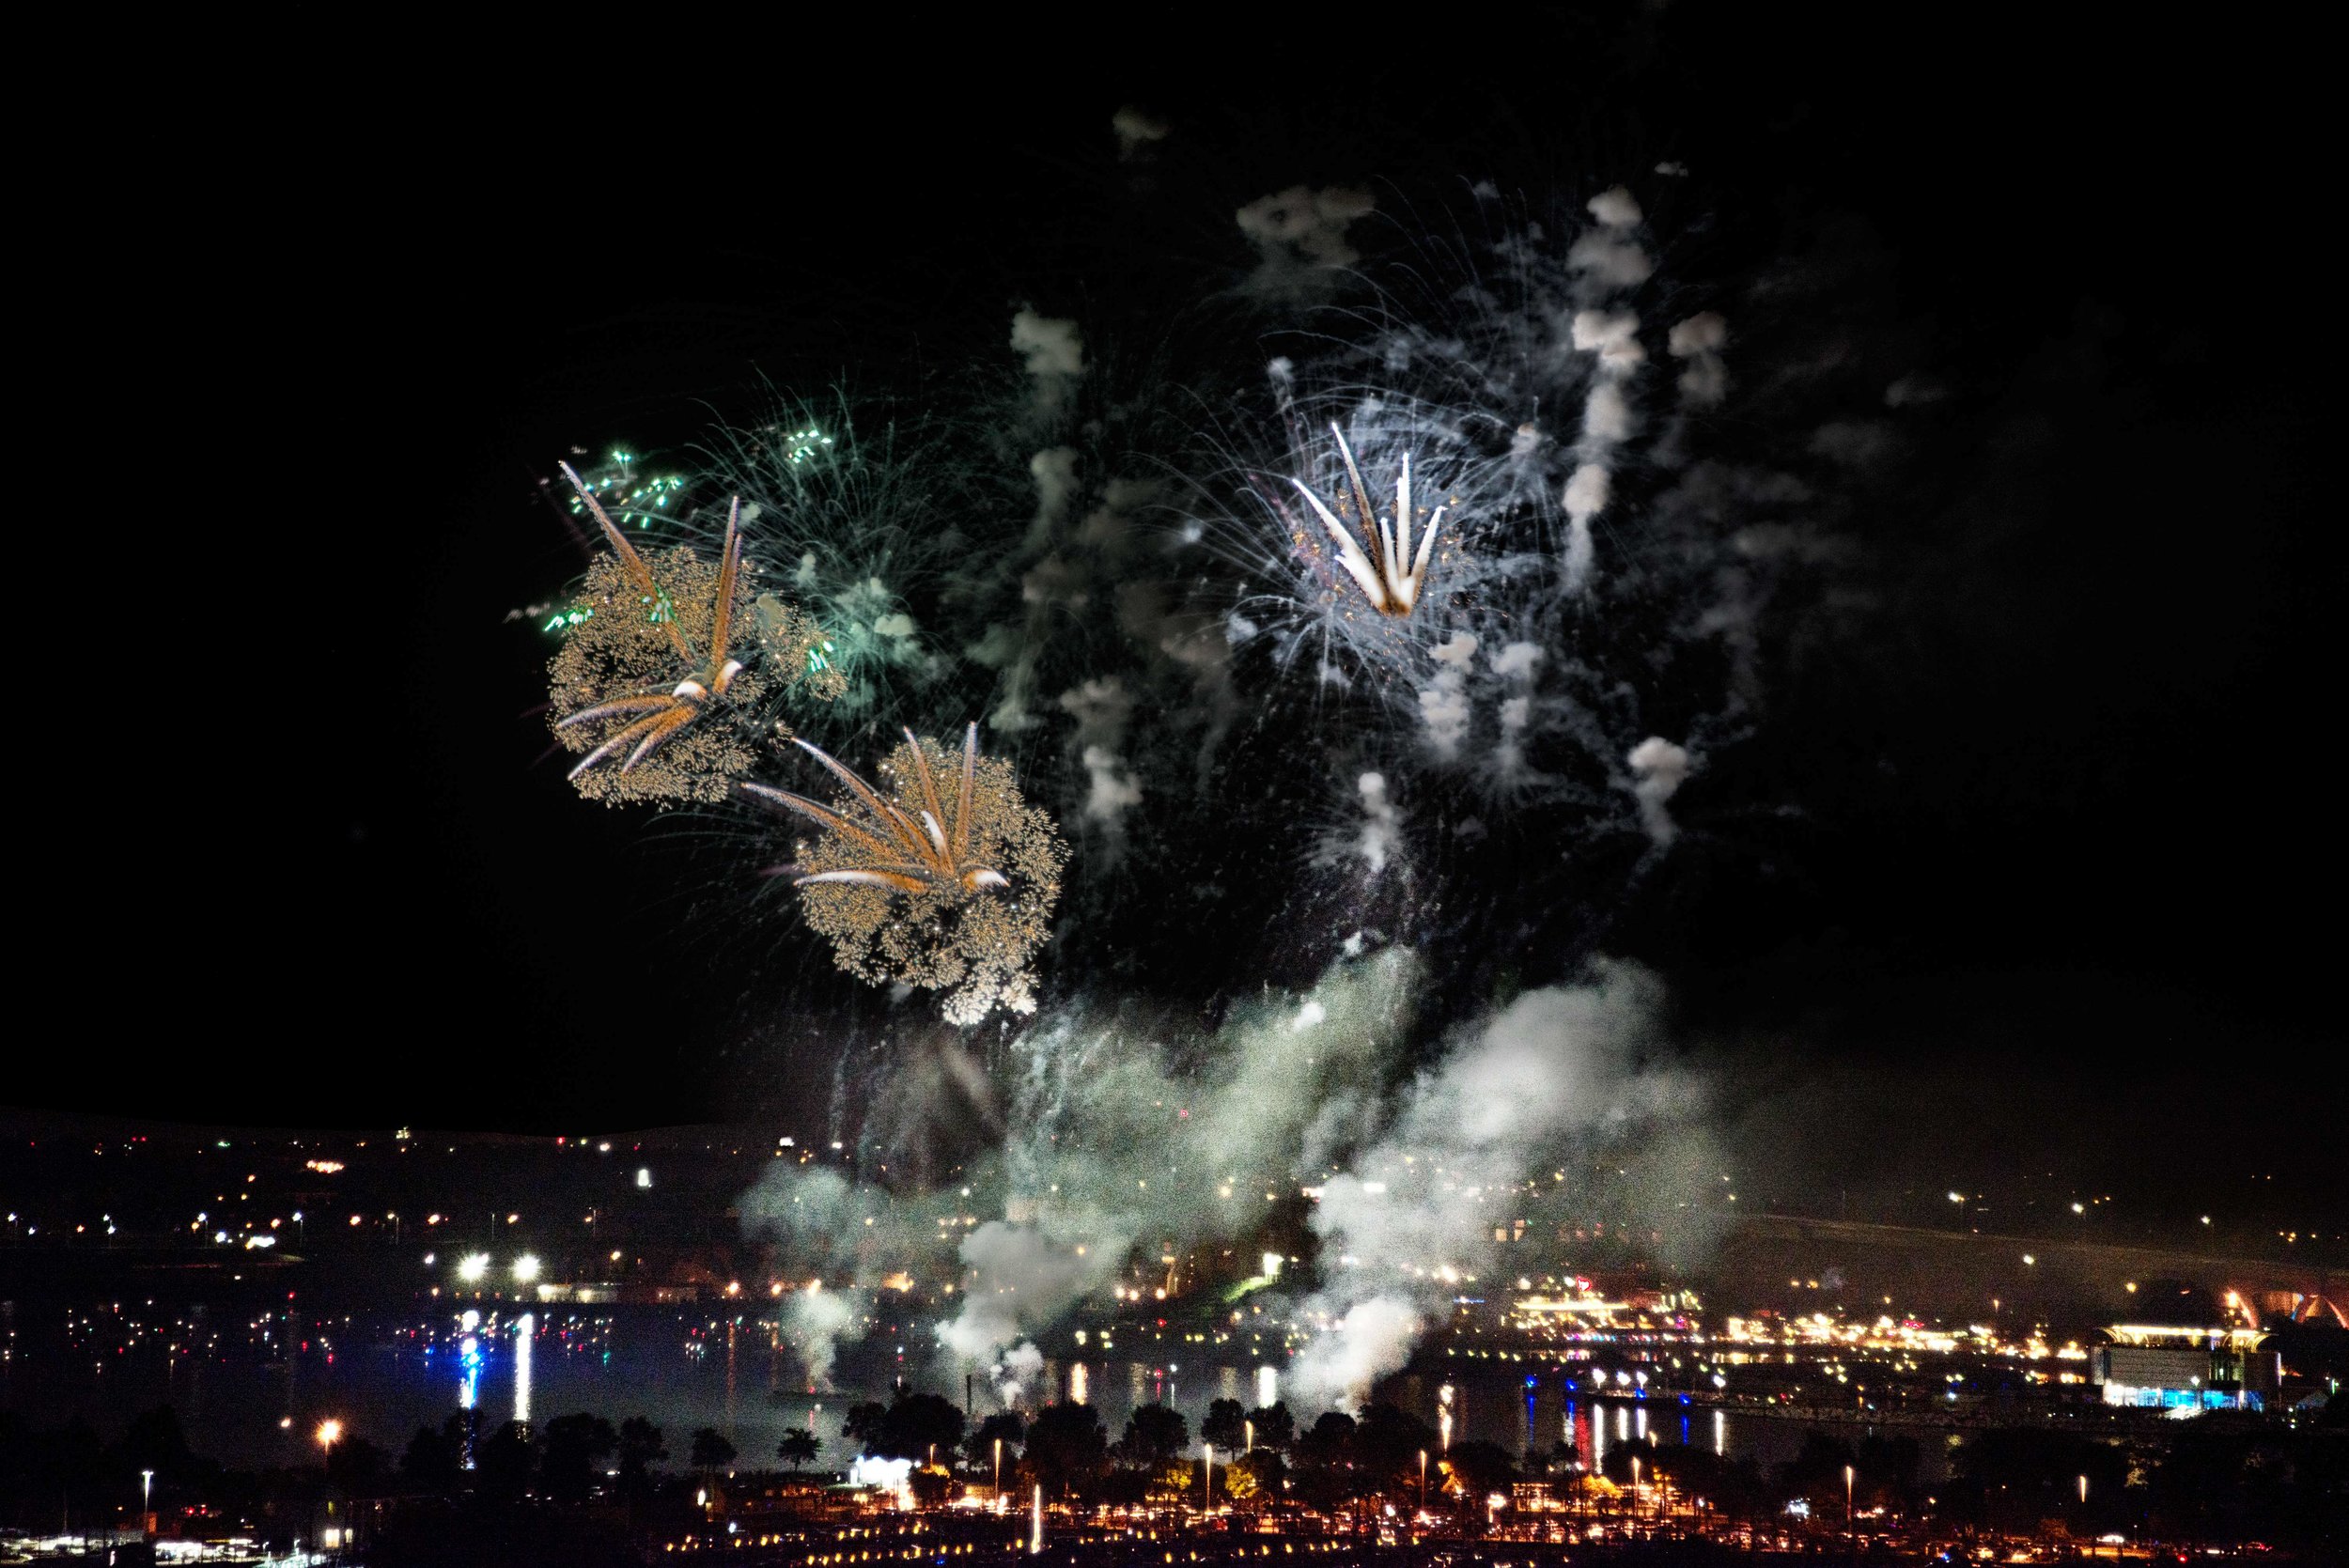 1st place . - Fireworks - Phyllis Bankier